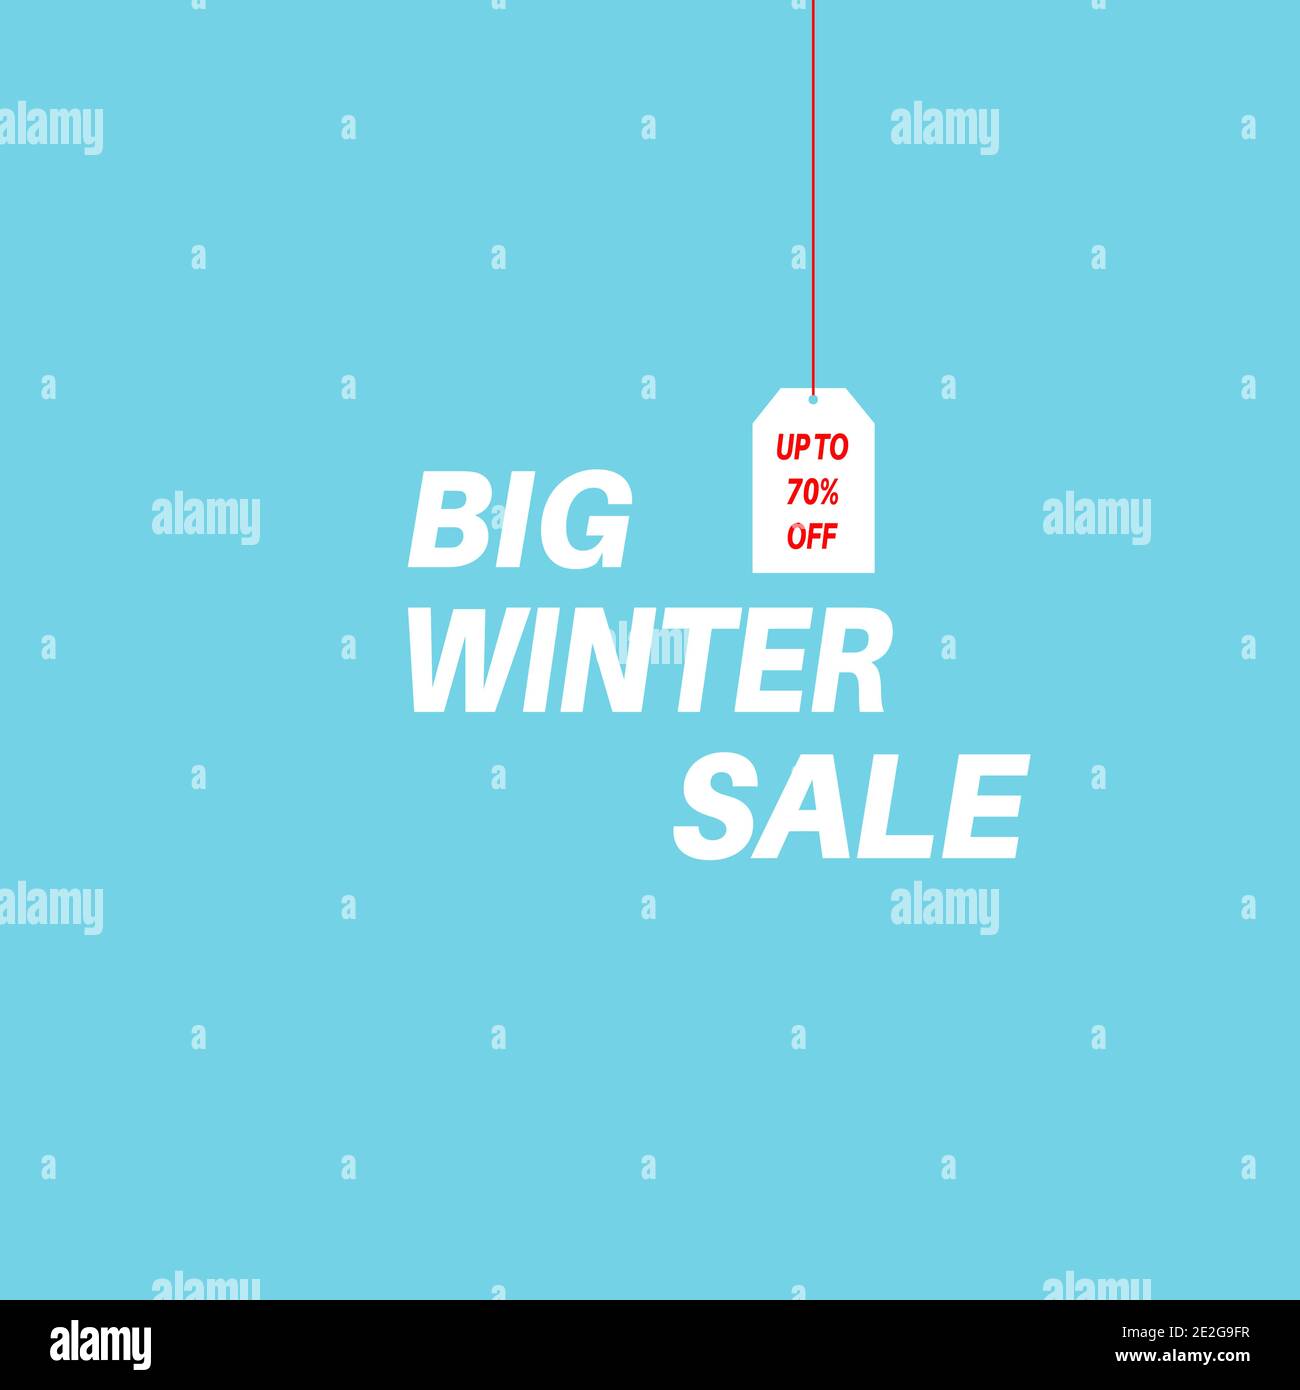 Winter sale poster and banner design. Stock Vector